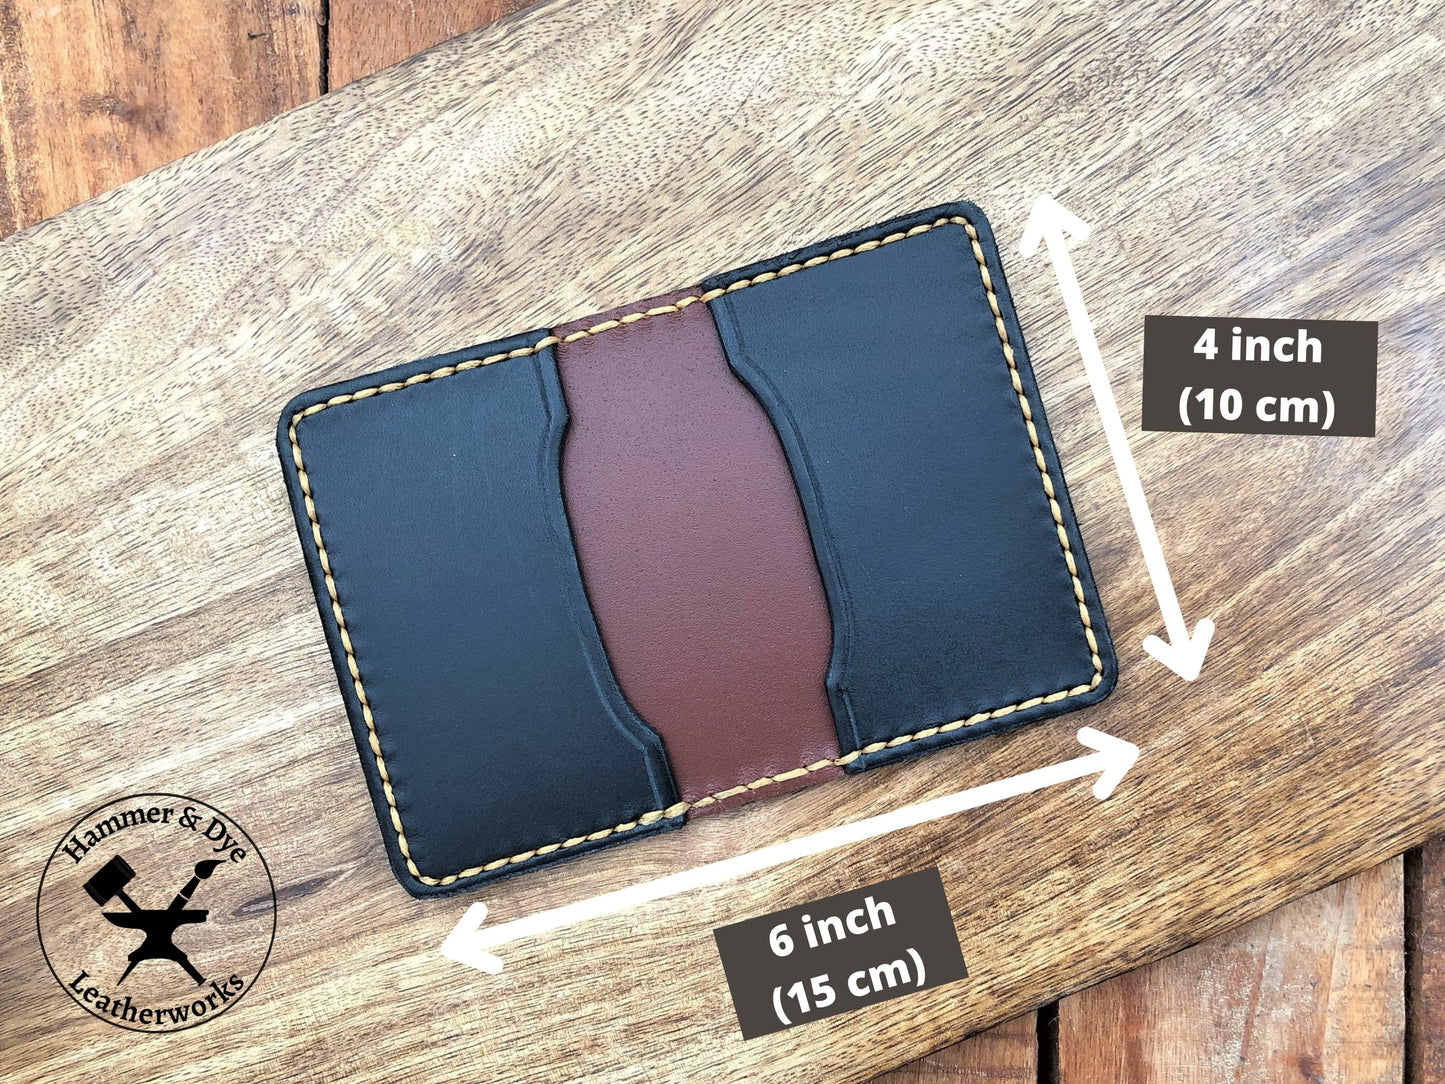 Handmade Two-tone Bifold Leather Card Wallet in Brown and Black with Hazel Stitching with sizing guide